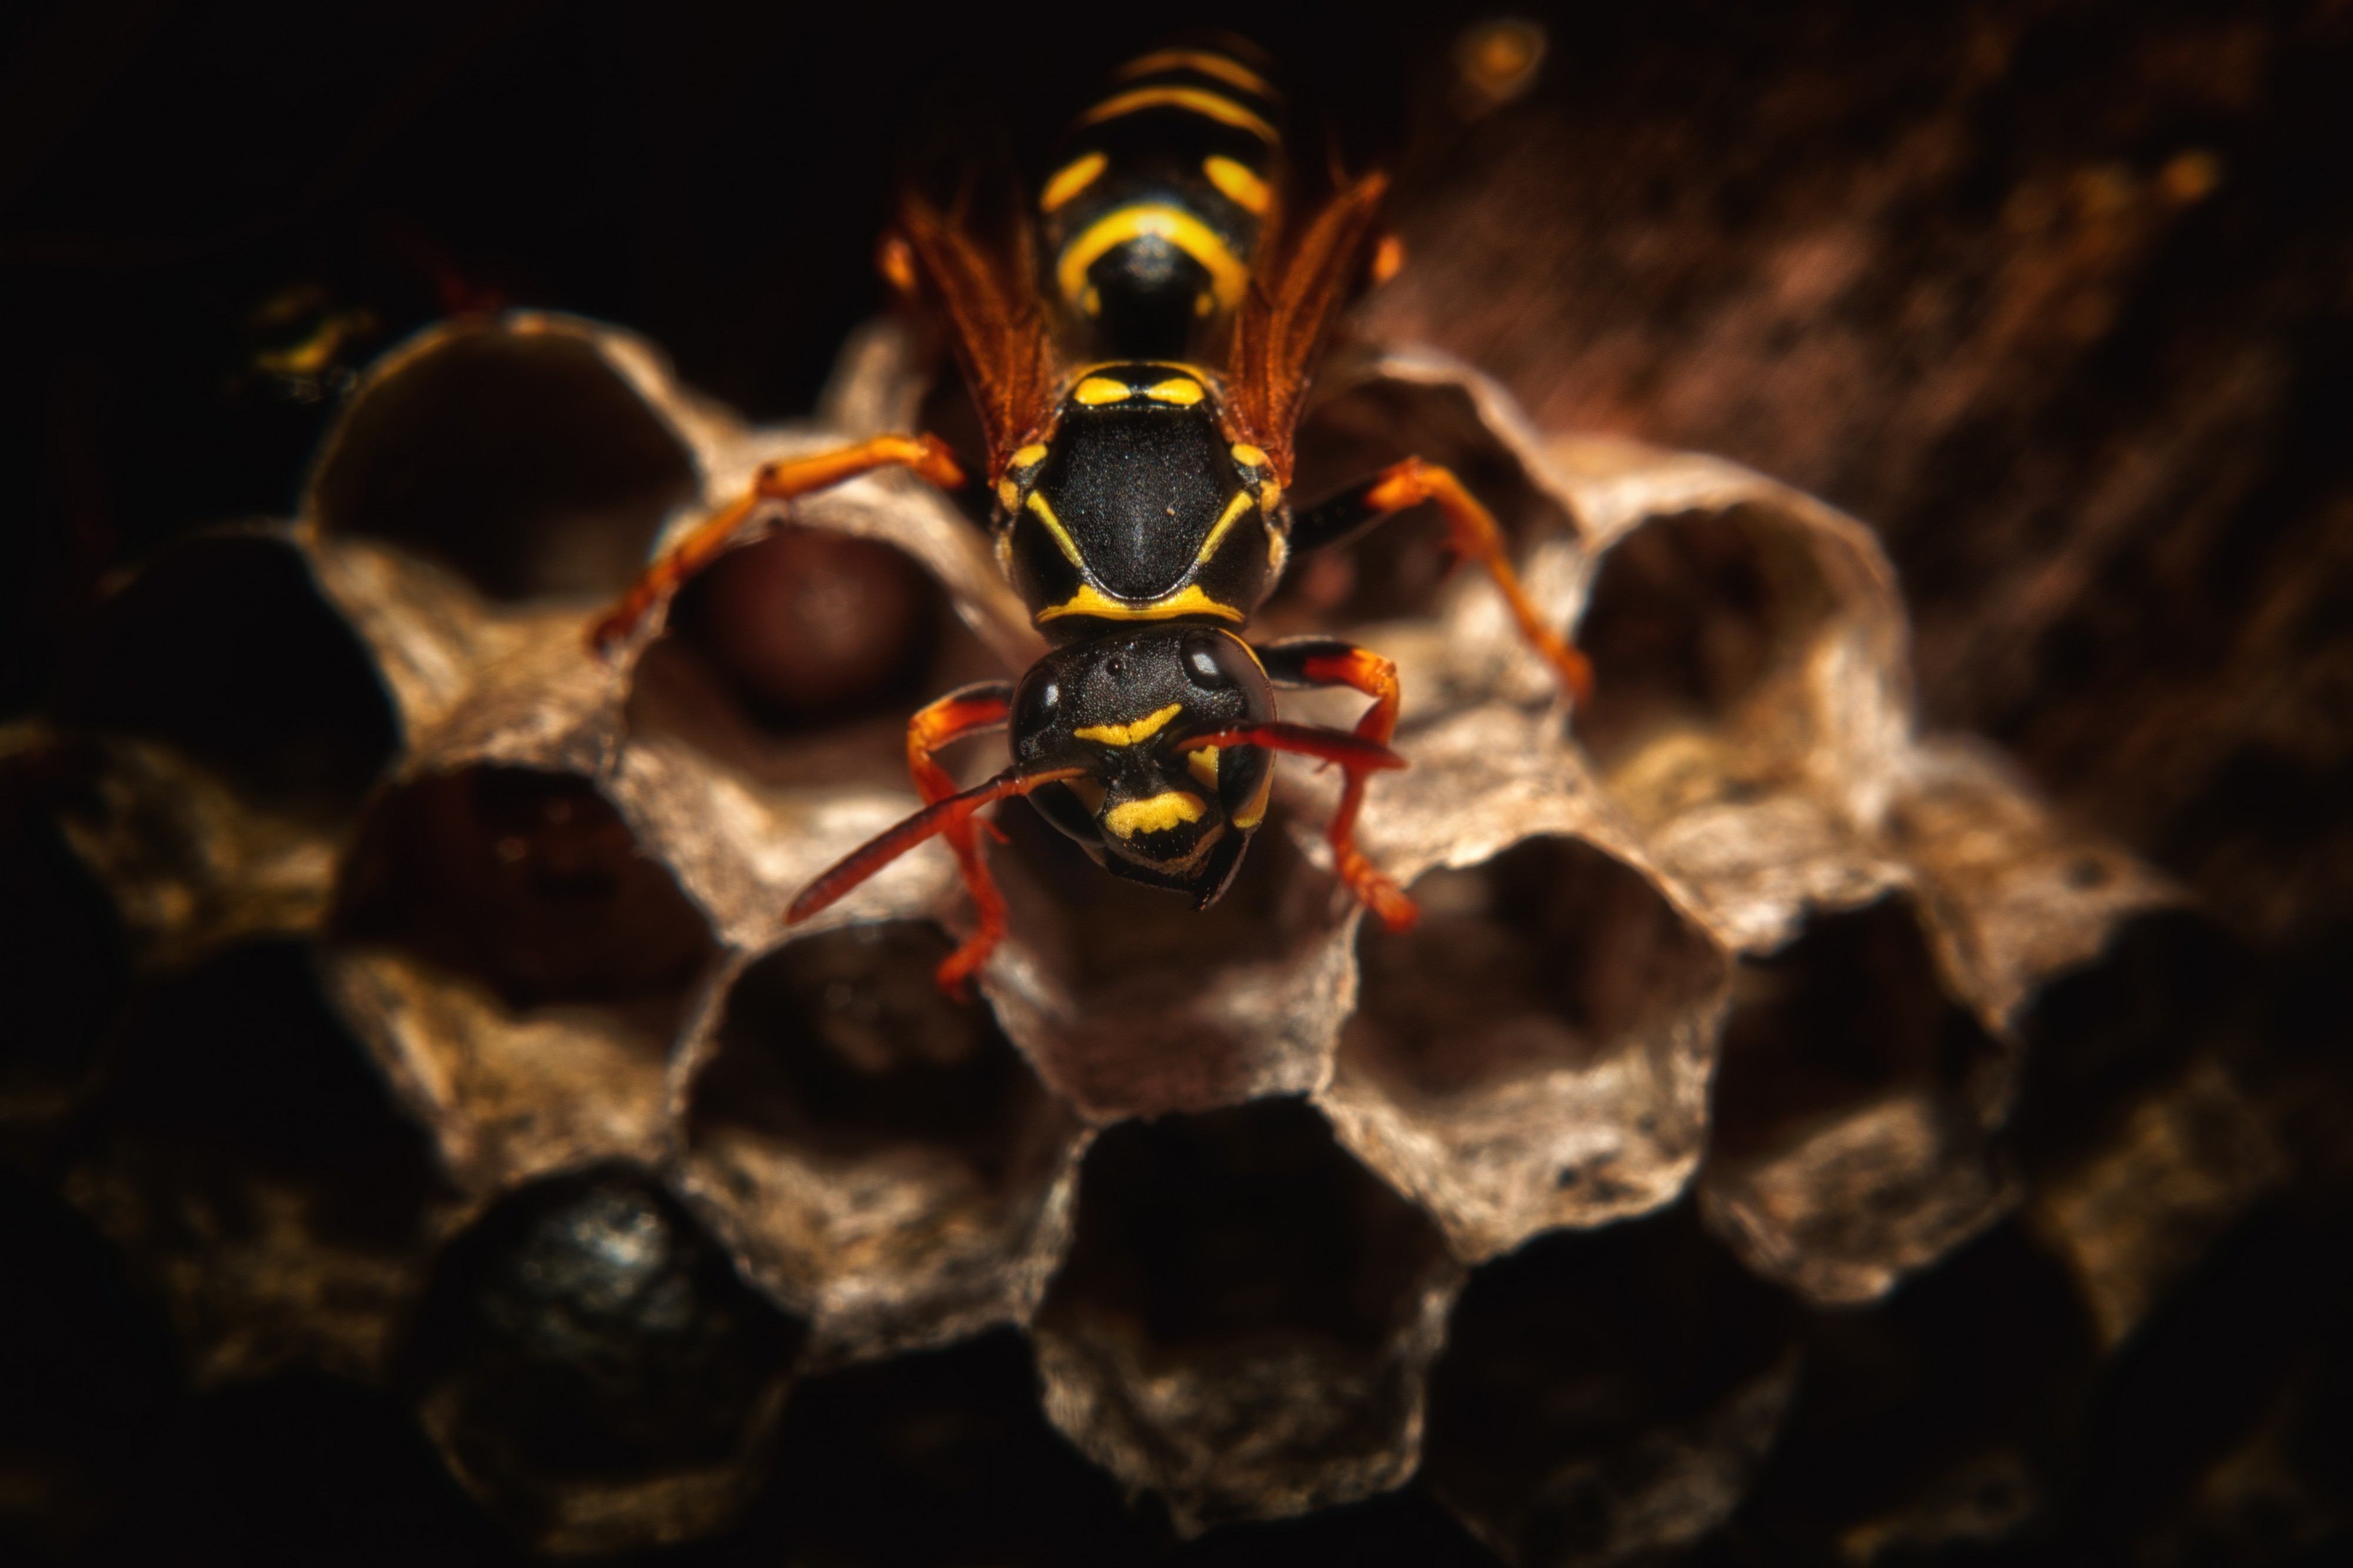 Paper wasp in the nest